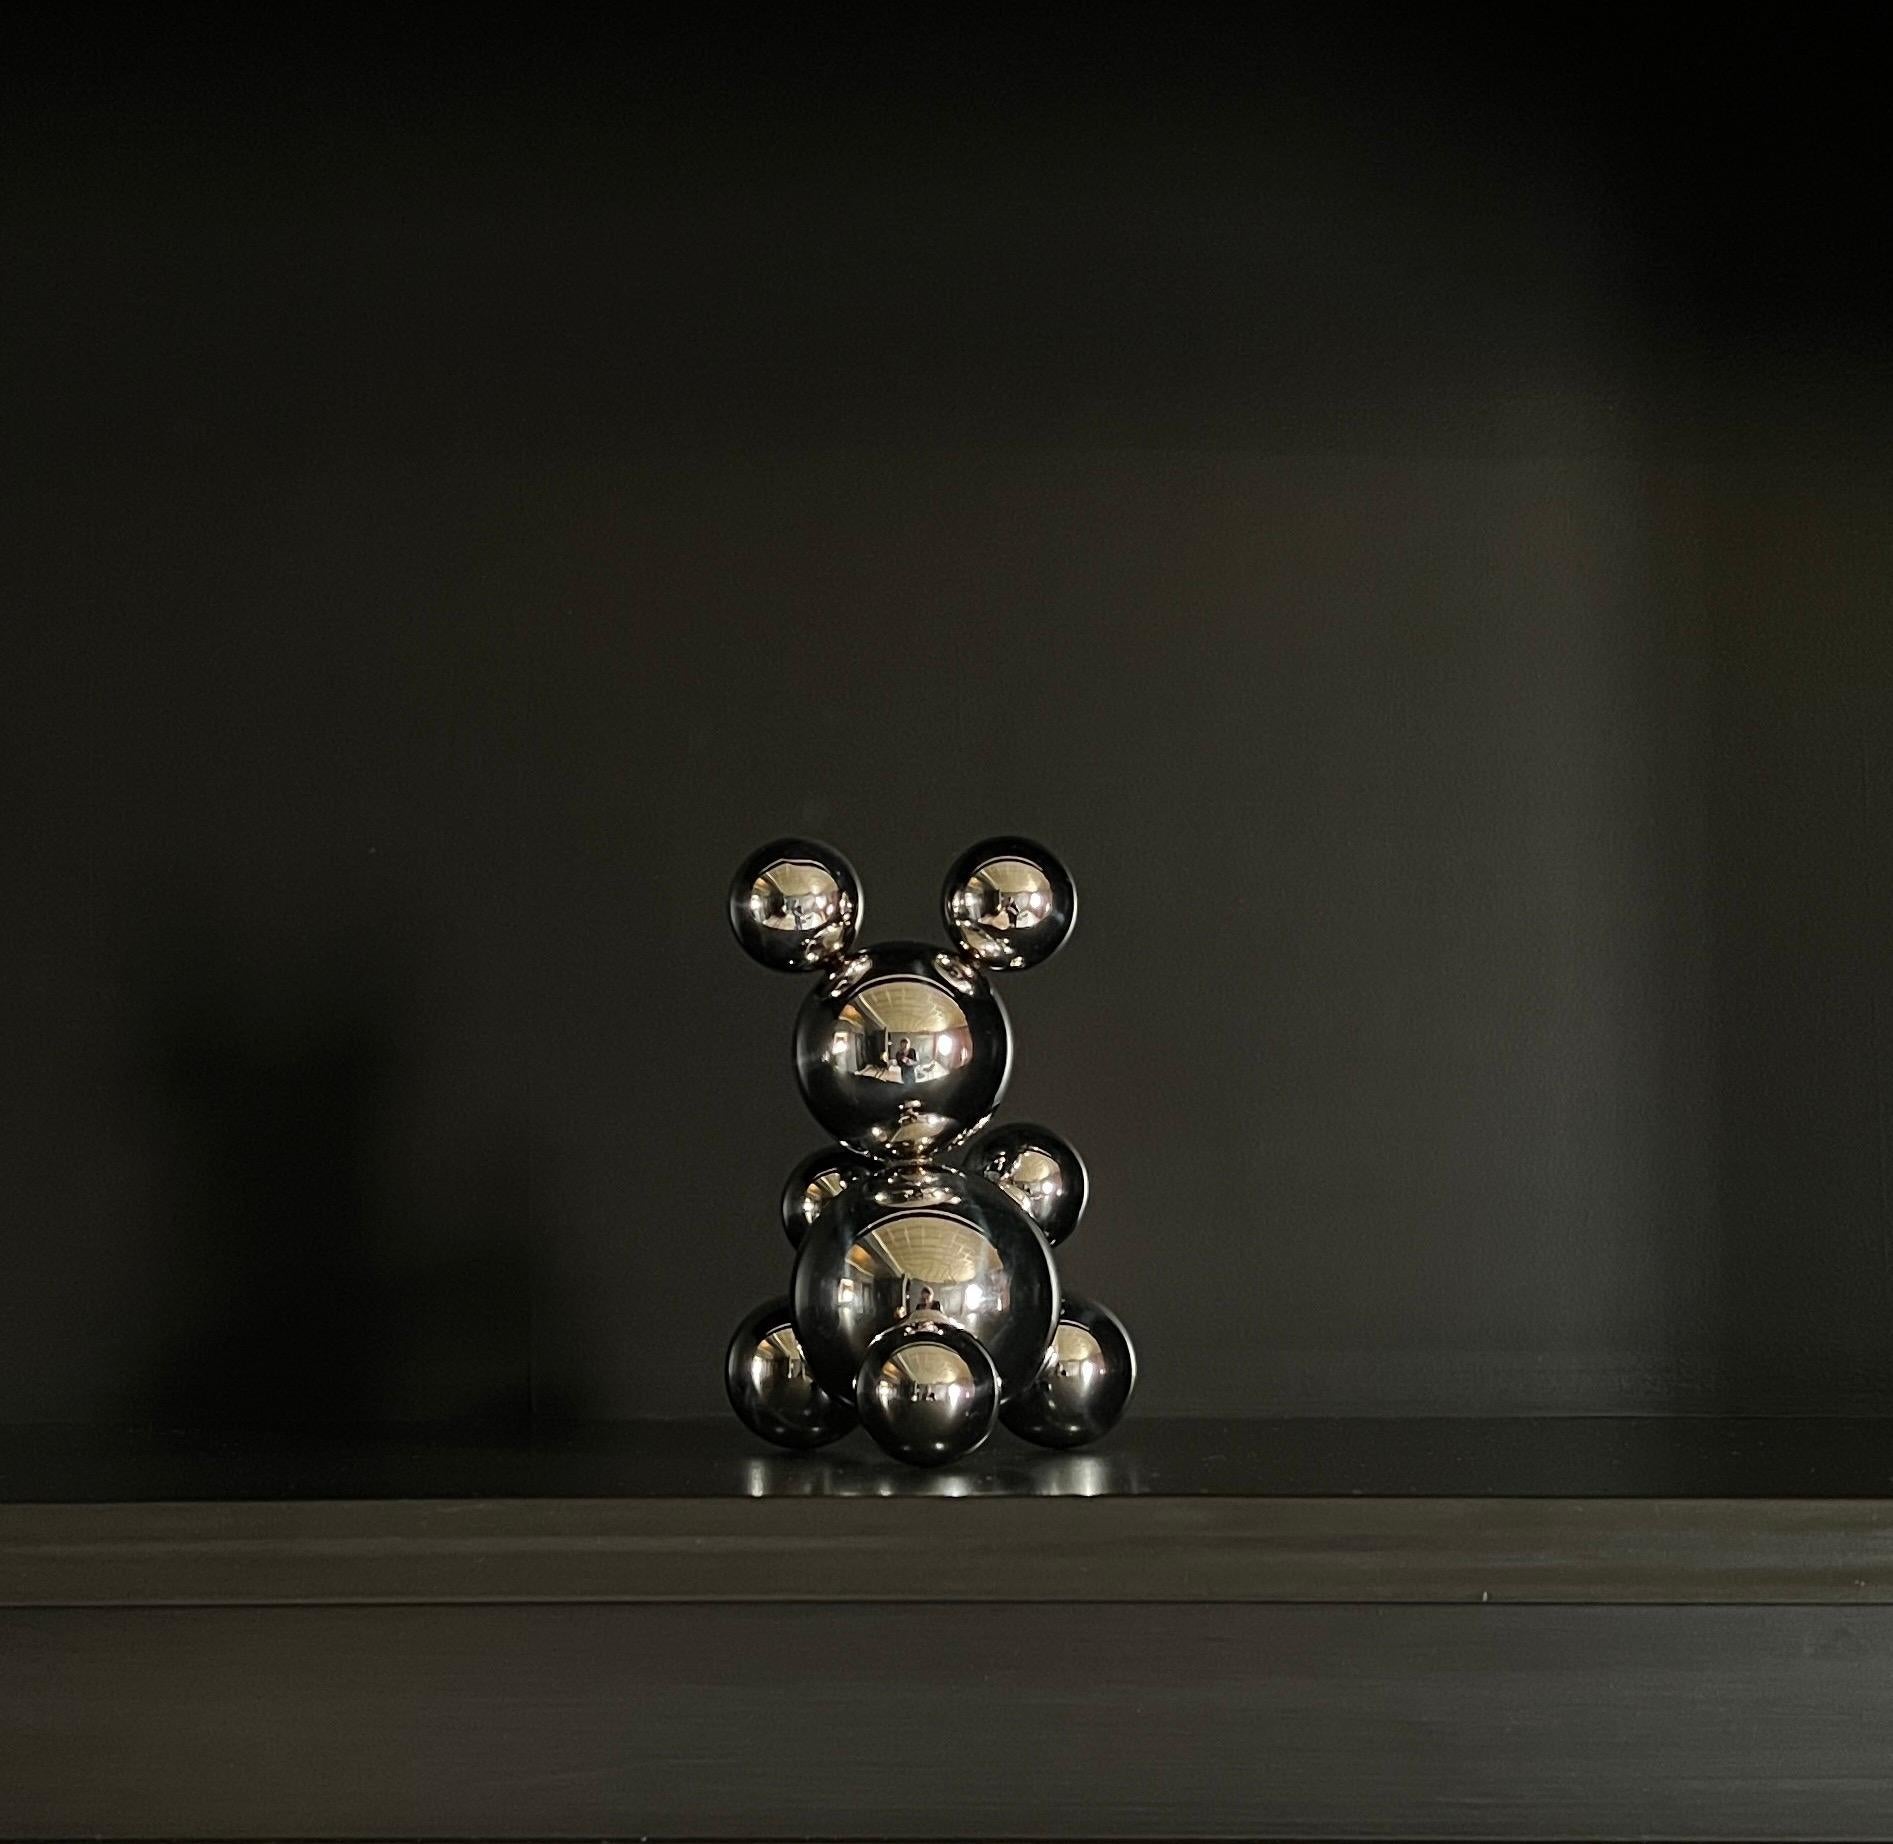 Tiny Stainless Steel Bear 'Emily' Sculpture Minimalistic Animal For Sale 2